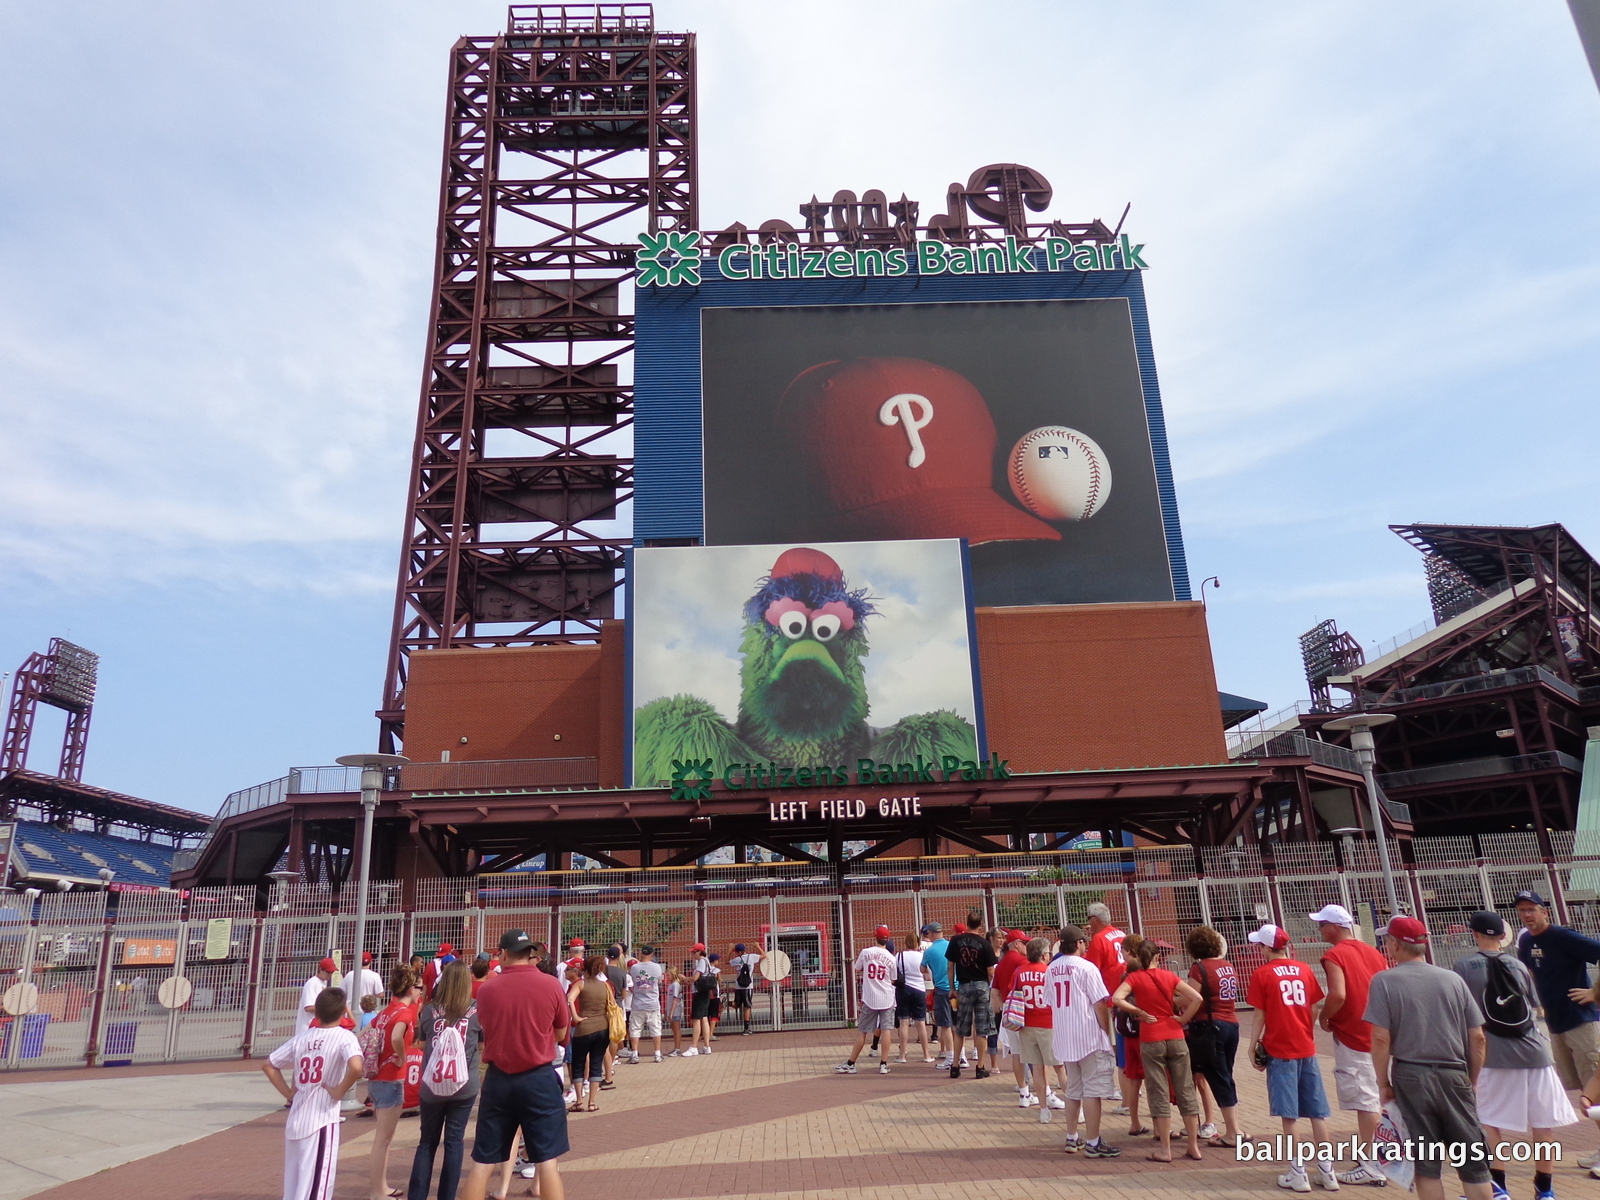 Philly Phanatic Citizens Bank Park